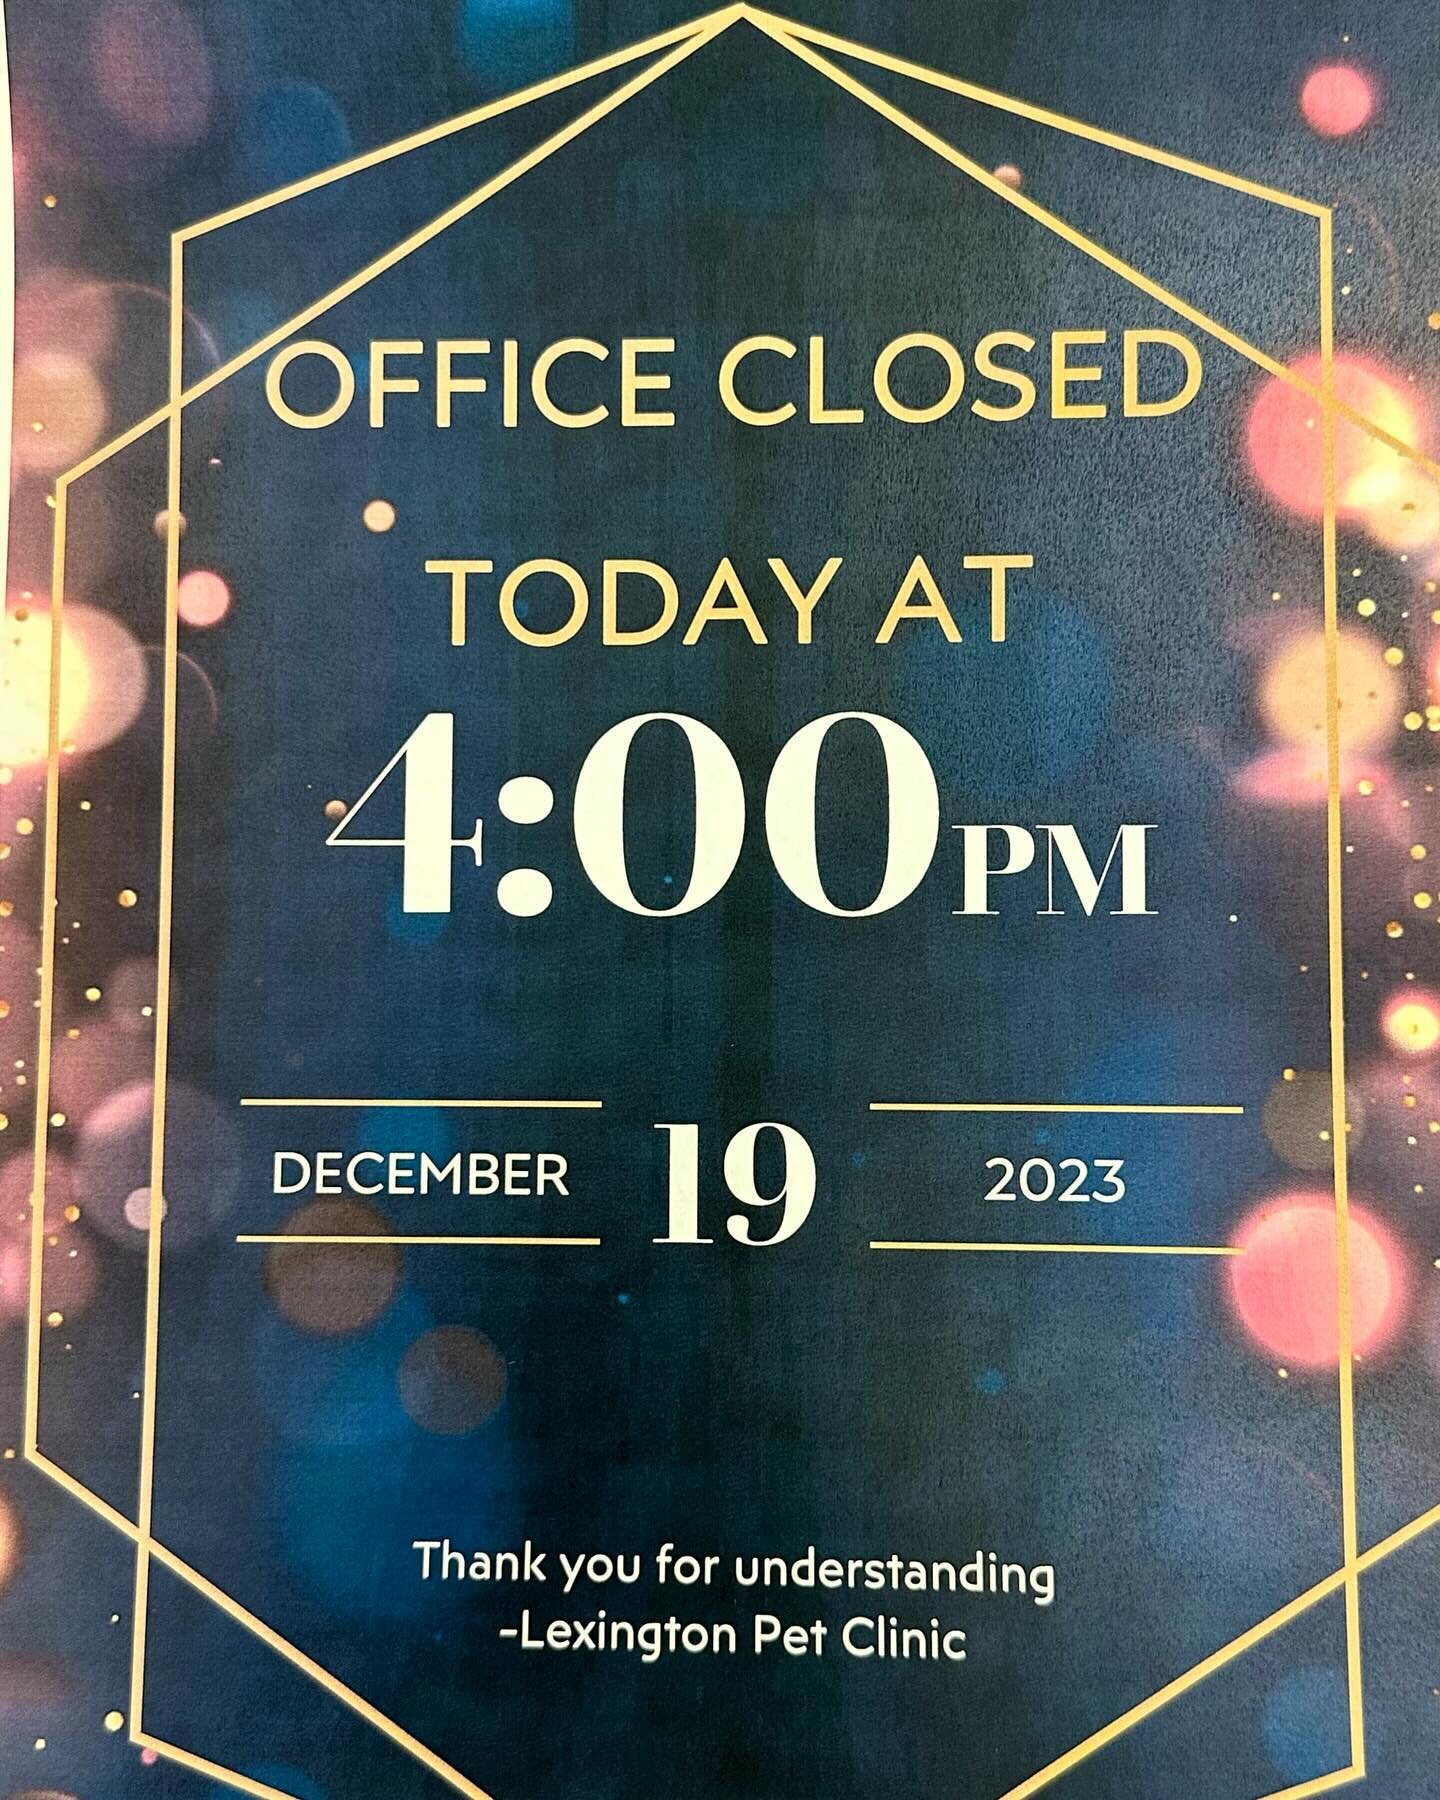 Office closed at 4:00pm today.🐾 

Have a great day! ☀️